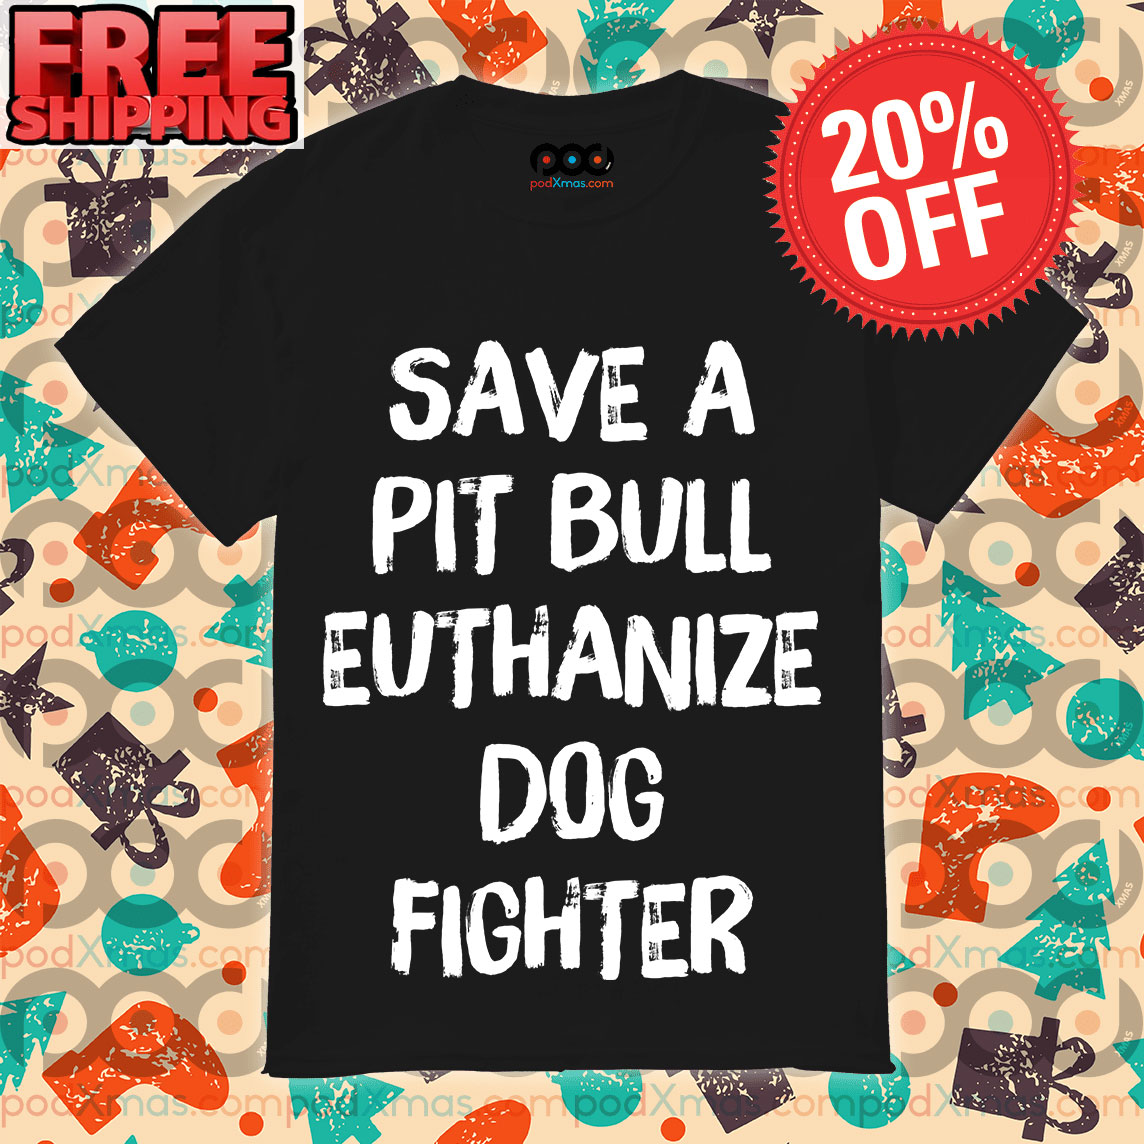 Save A Pit Bull Euthanize A Dog Fighter - Pitbull' Women's T-Shirt